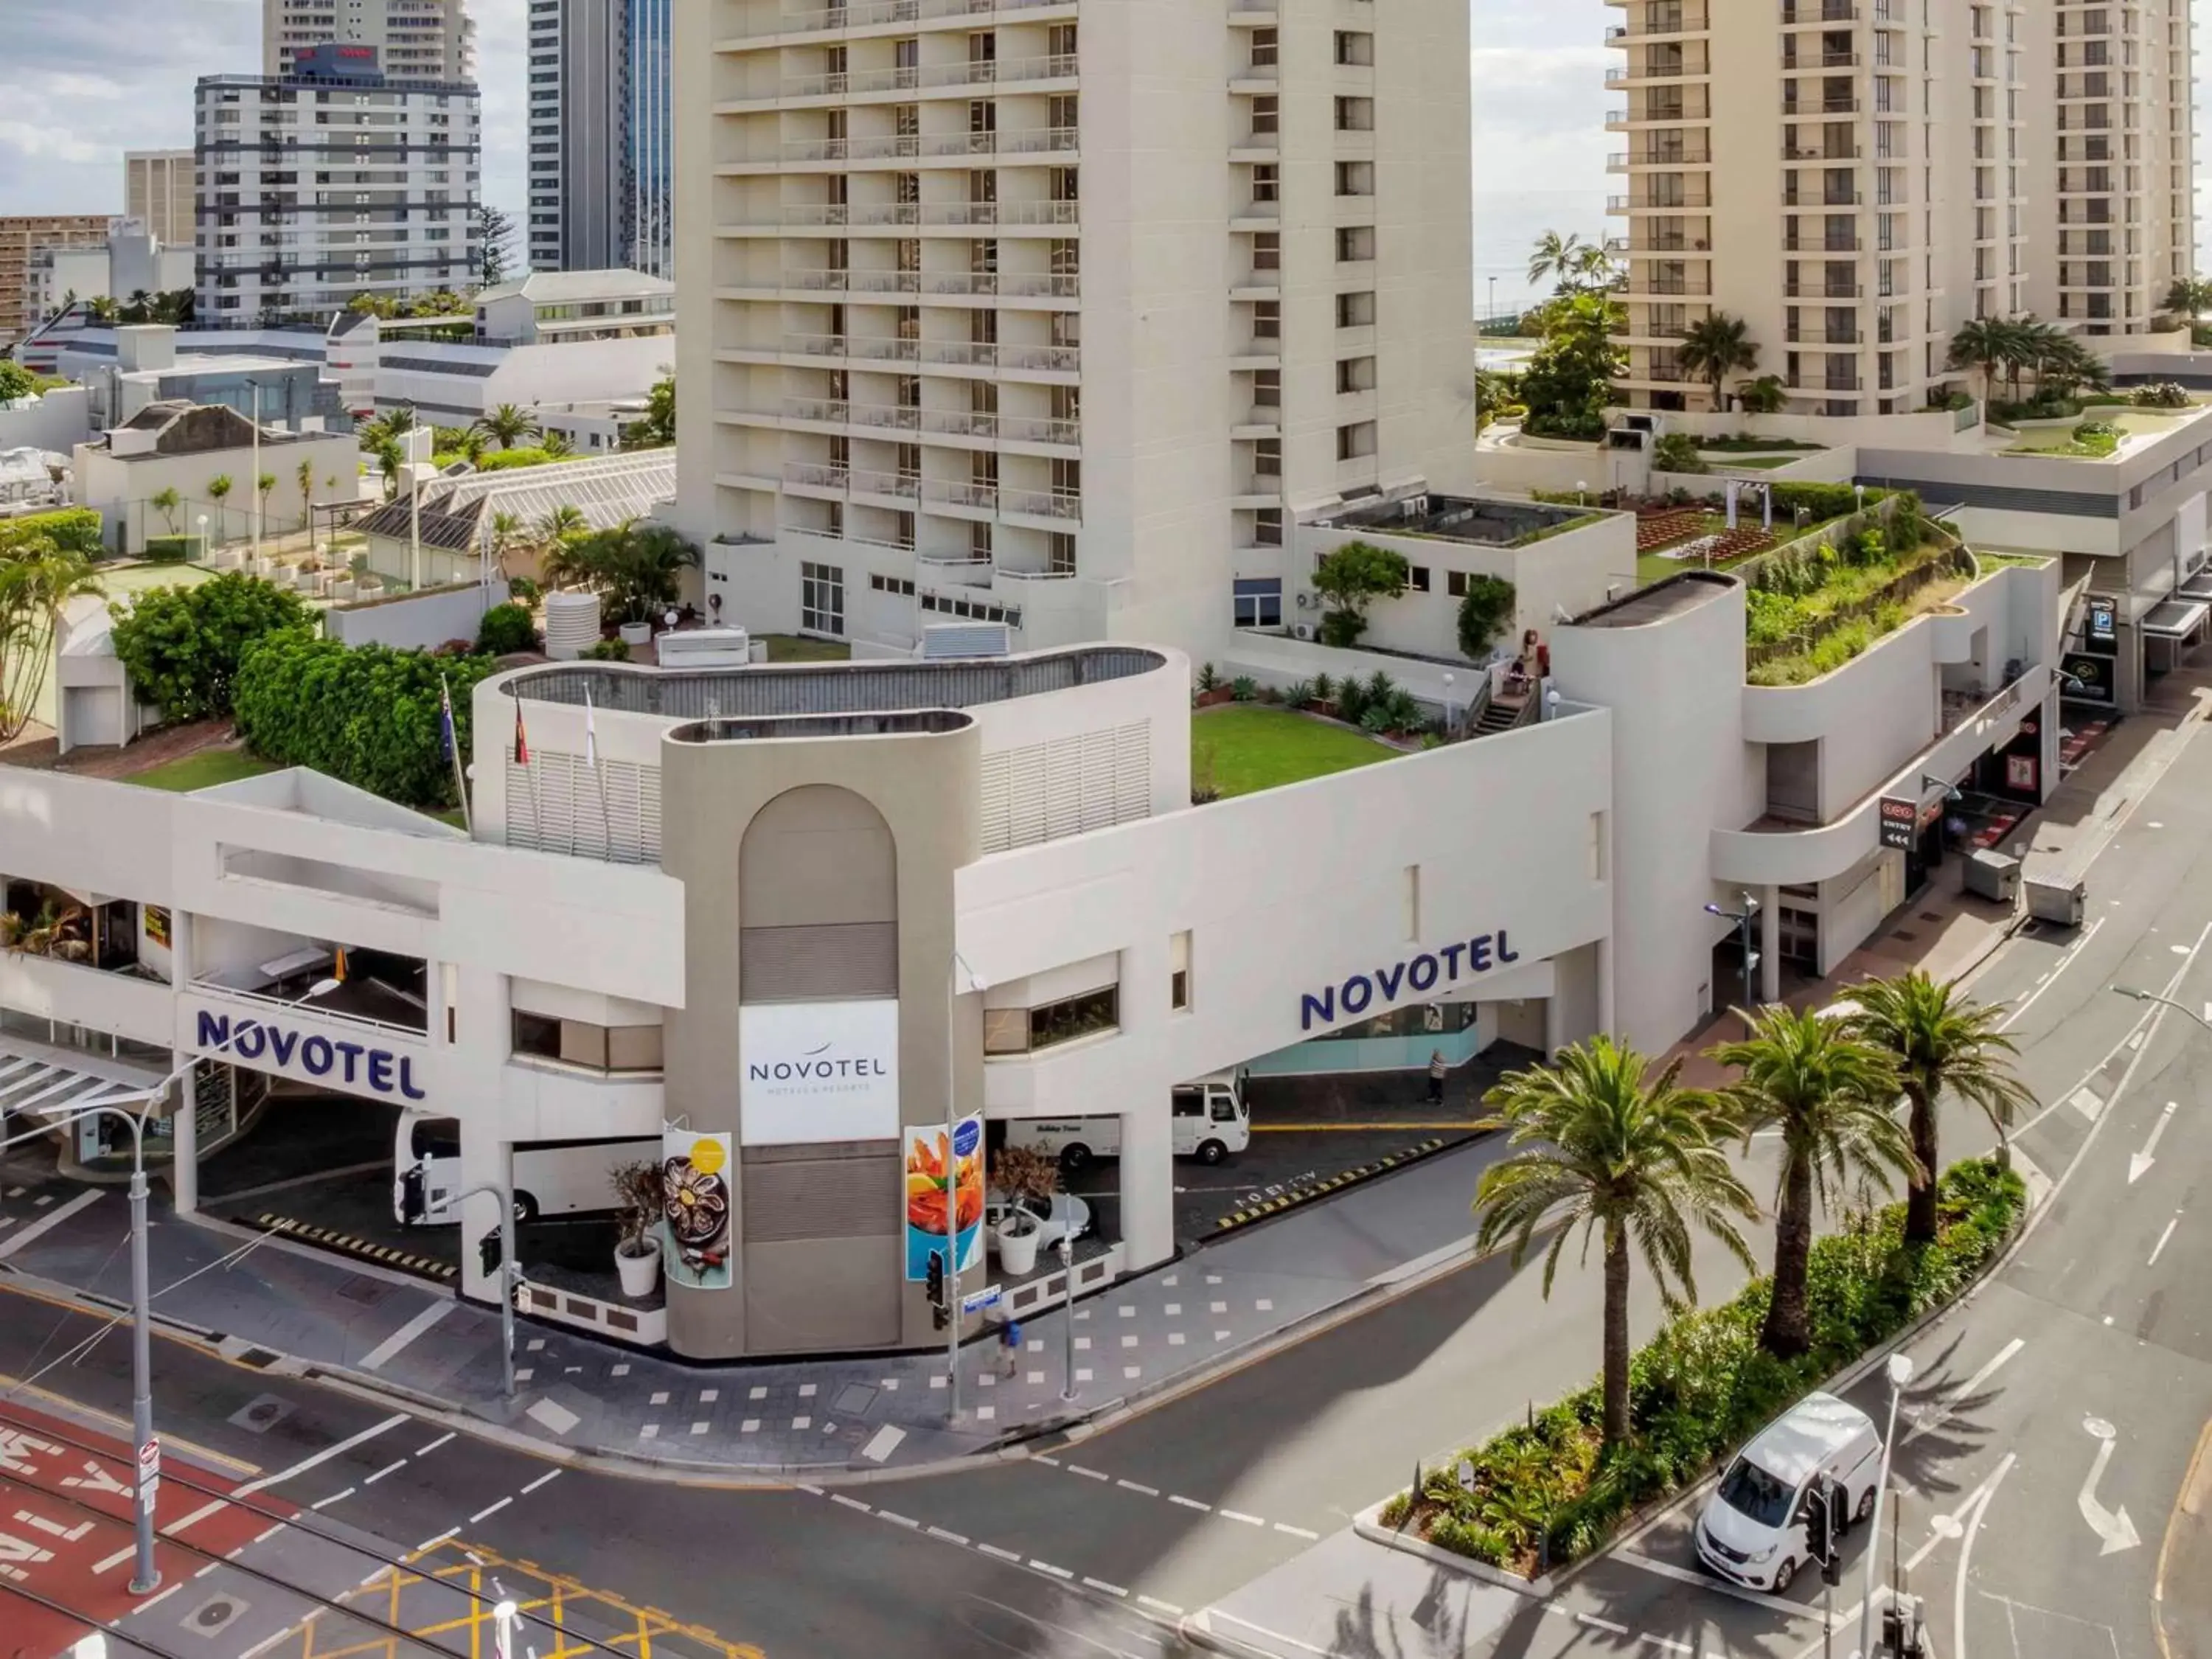 Property building in Novotel Surfers Paradise